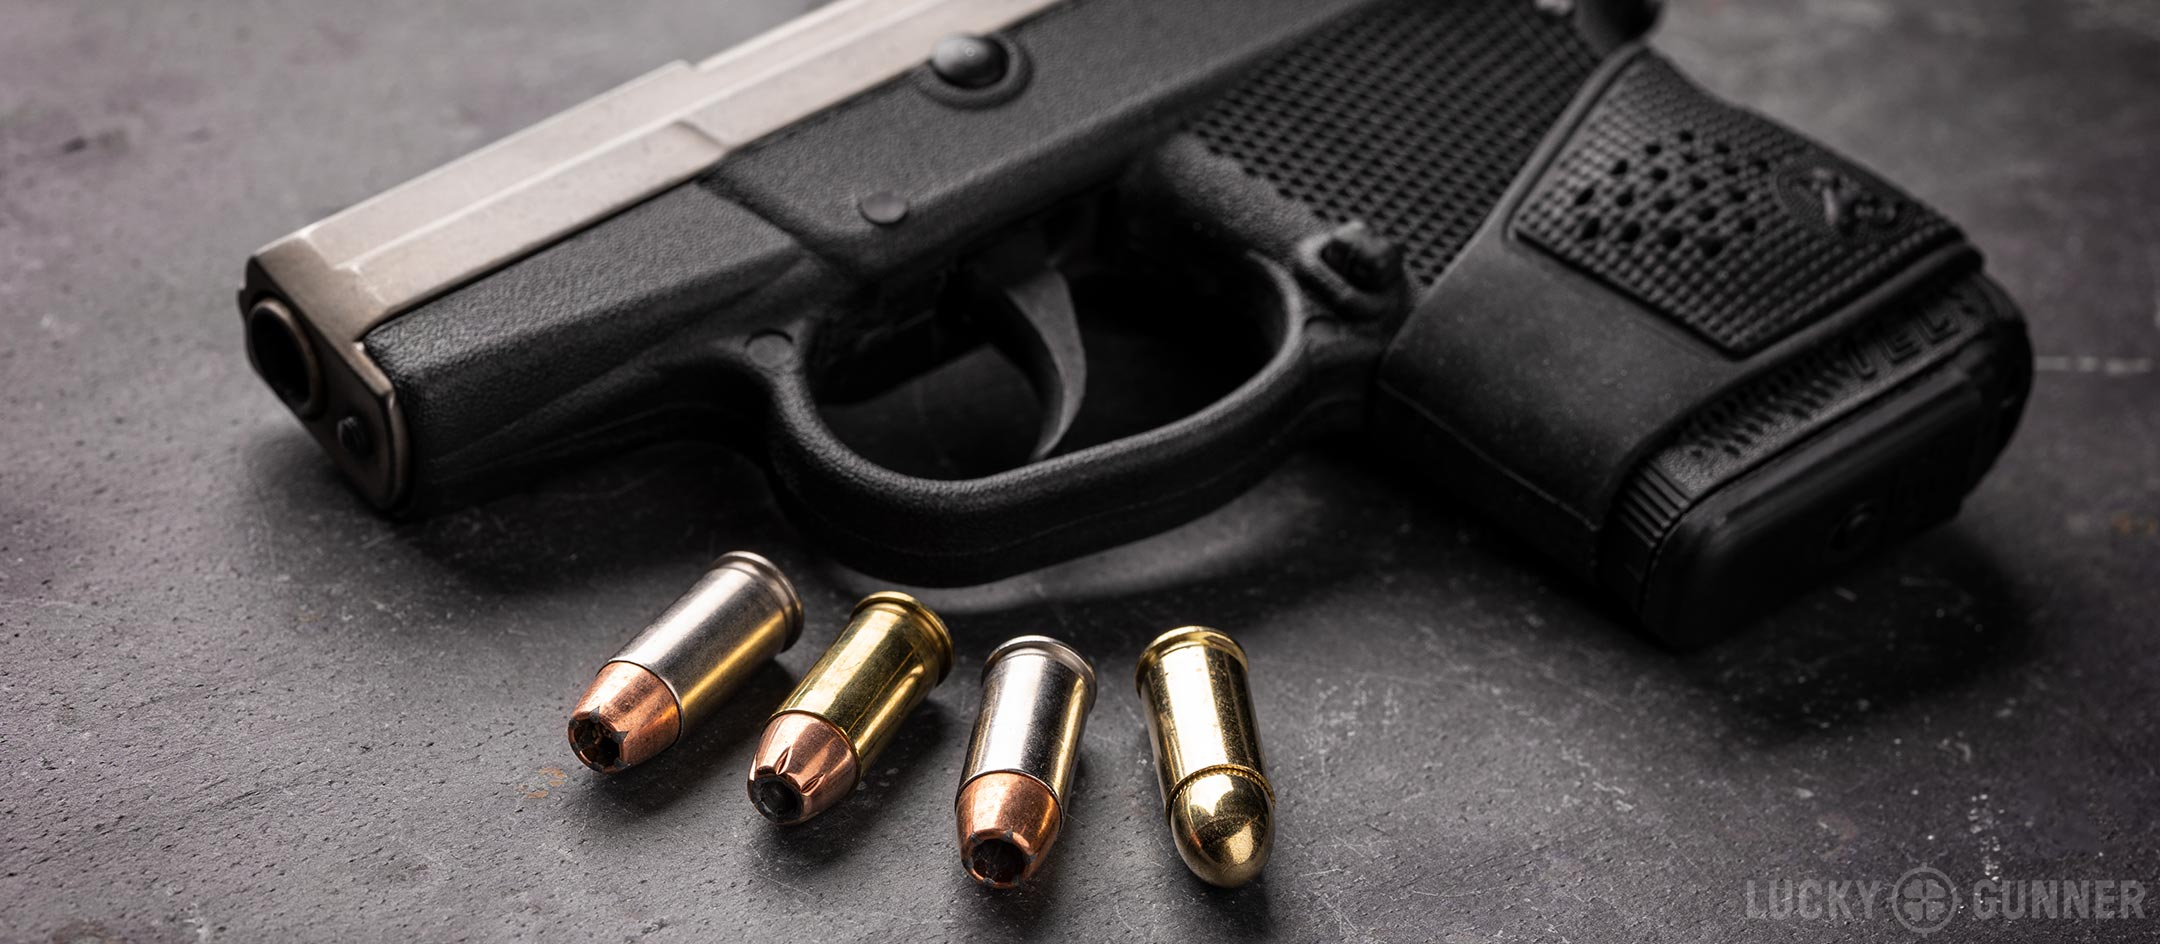 32 ACP VS. 380 ACP  What Caliber Is Better for You?